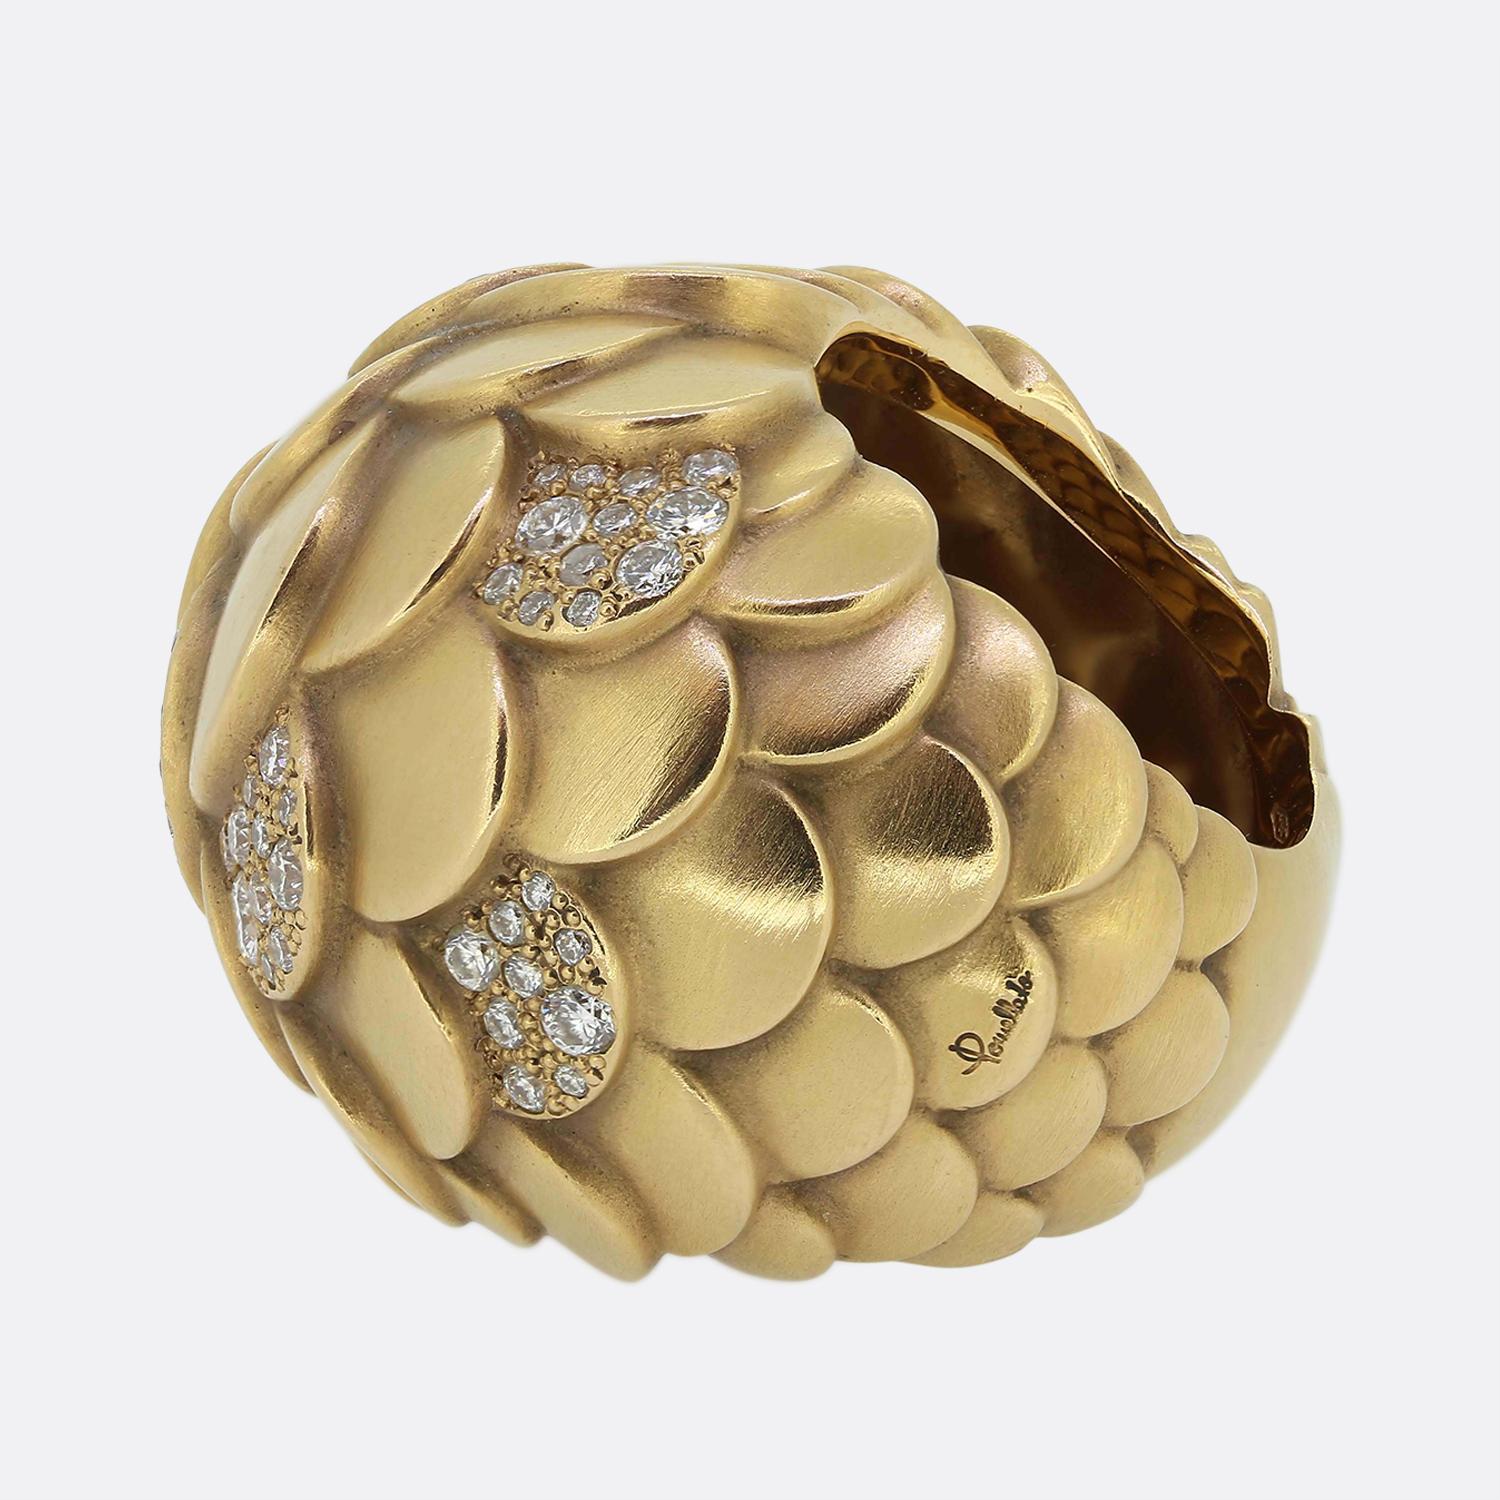 This is large cocktail ring from the luxury jewellery designer Pomellato. The ring forms part of the Sirène collection and is inspired by the creatures of the sea. This substantial piece has been crafted from 18ct rose gold in the bombe style with a